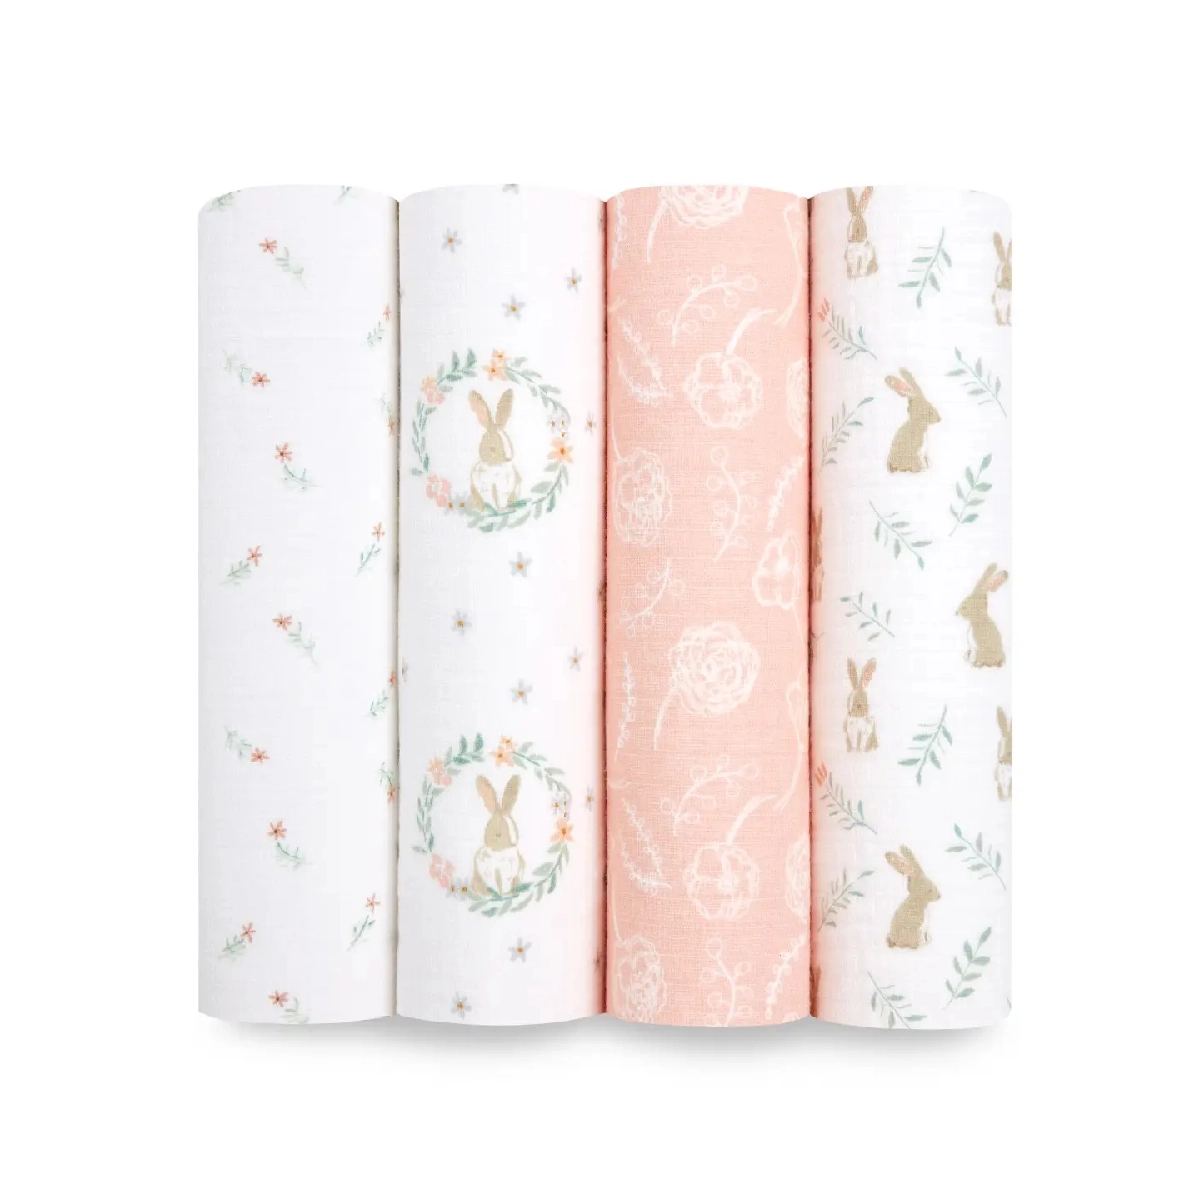 Image of Aden + Anais Pack of 4 Essentials Cotton Muslin Swaddle Blanket - Blushing Bunnies (23-19-248)